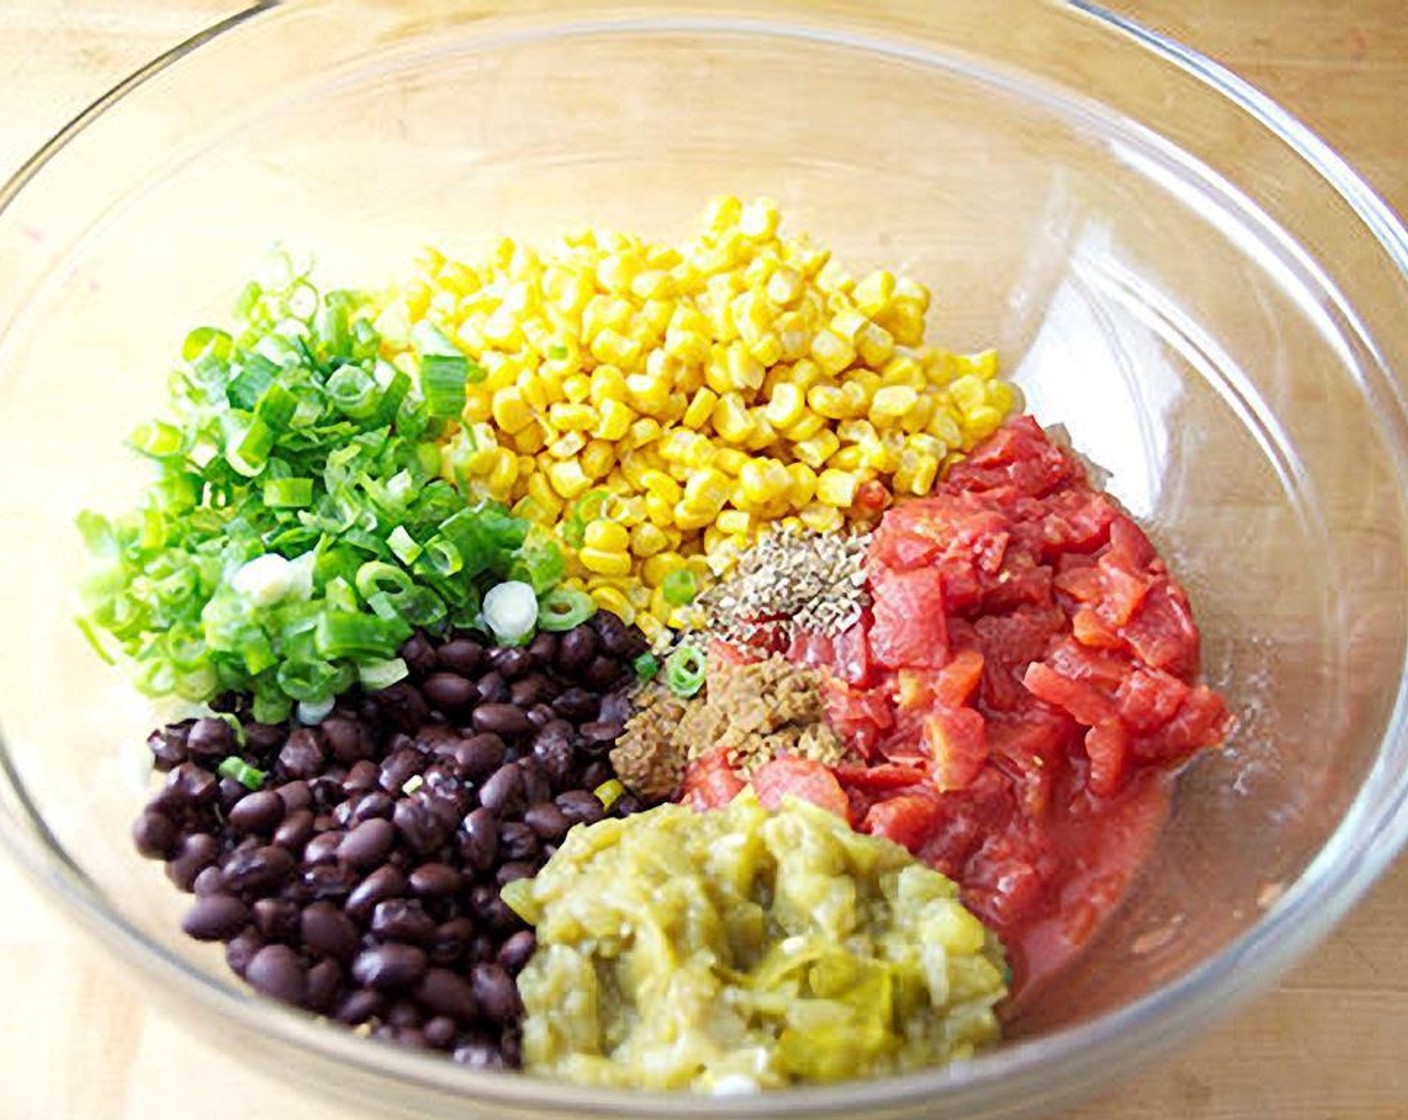 step 2 Combine Black Beans (1 can), Tomato (1 can), Frozen Corn Kernels (2 cups), Diced Green Chiles (1 can), Scallion (1 bunch), Chili Powder (1 tsp), Ground Cumin (1 tsp), Dried Oregano (1/2 tsp), and Salt (1/2 tsp).